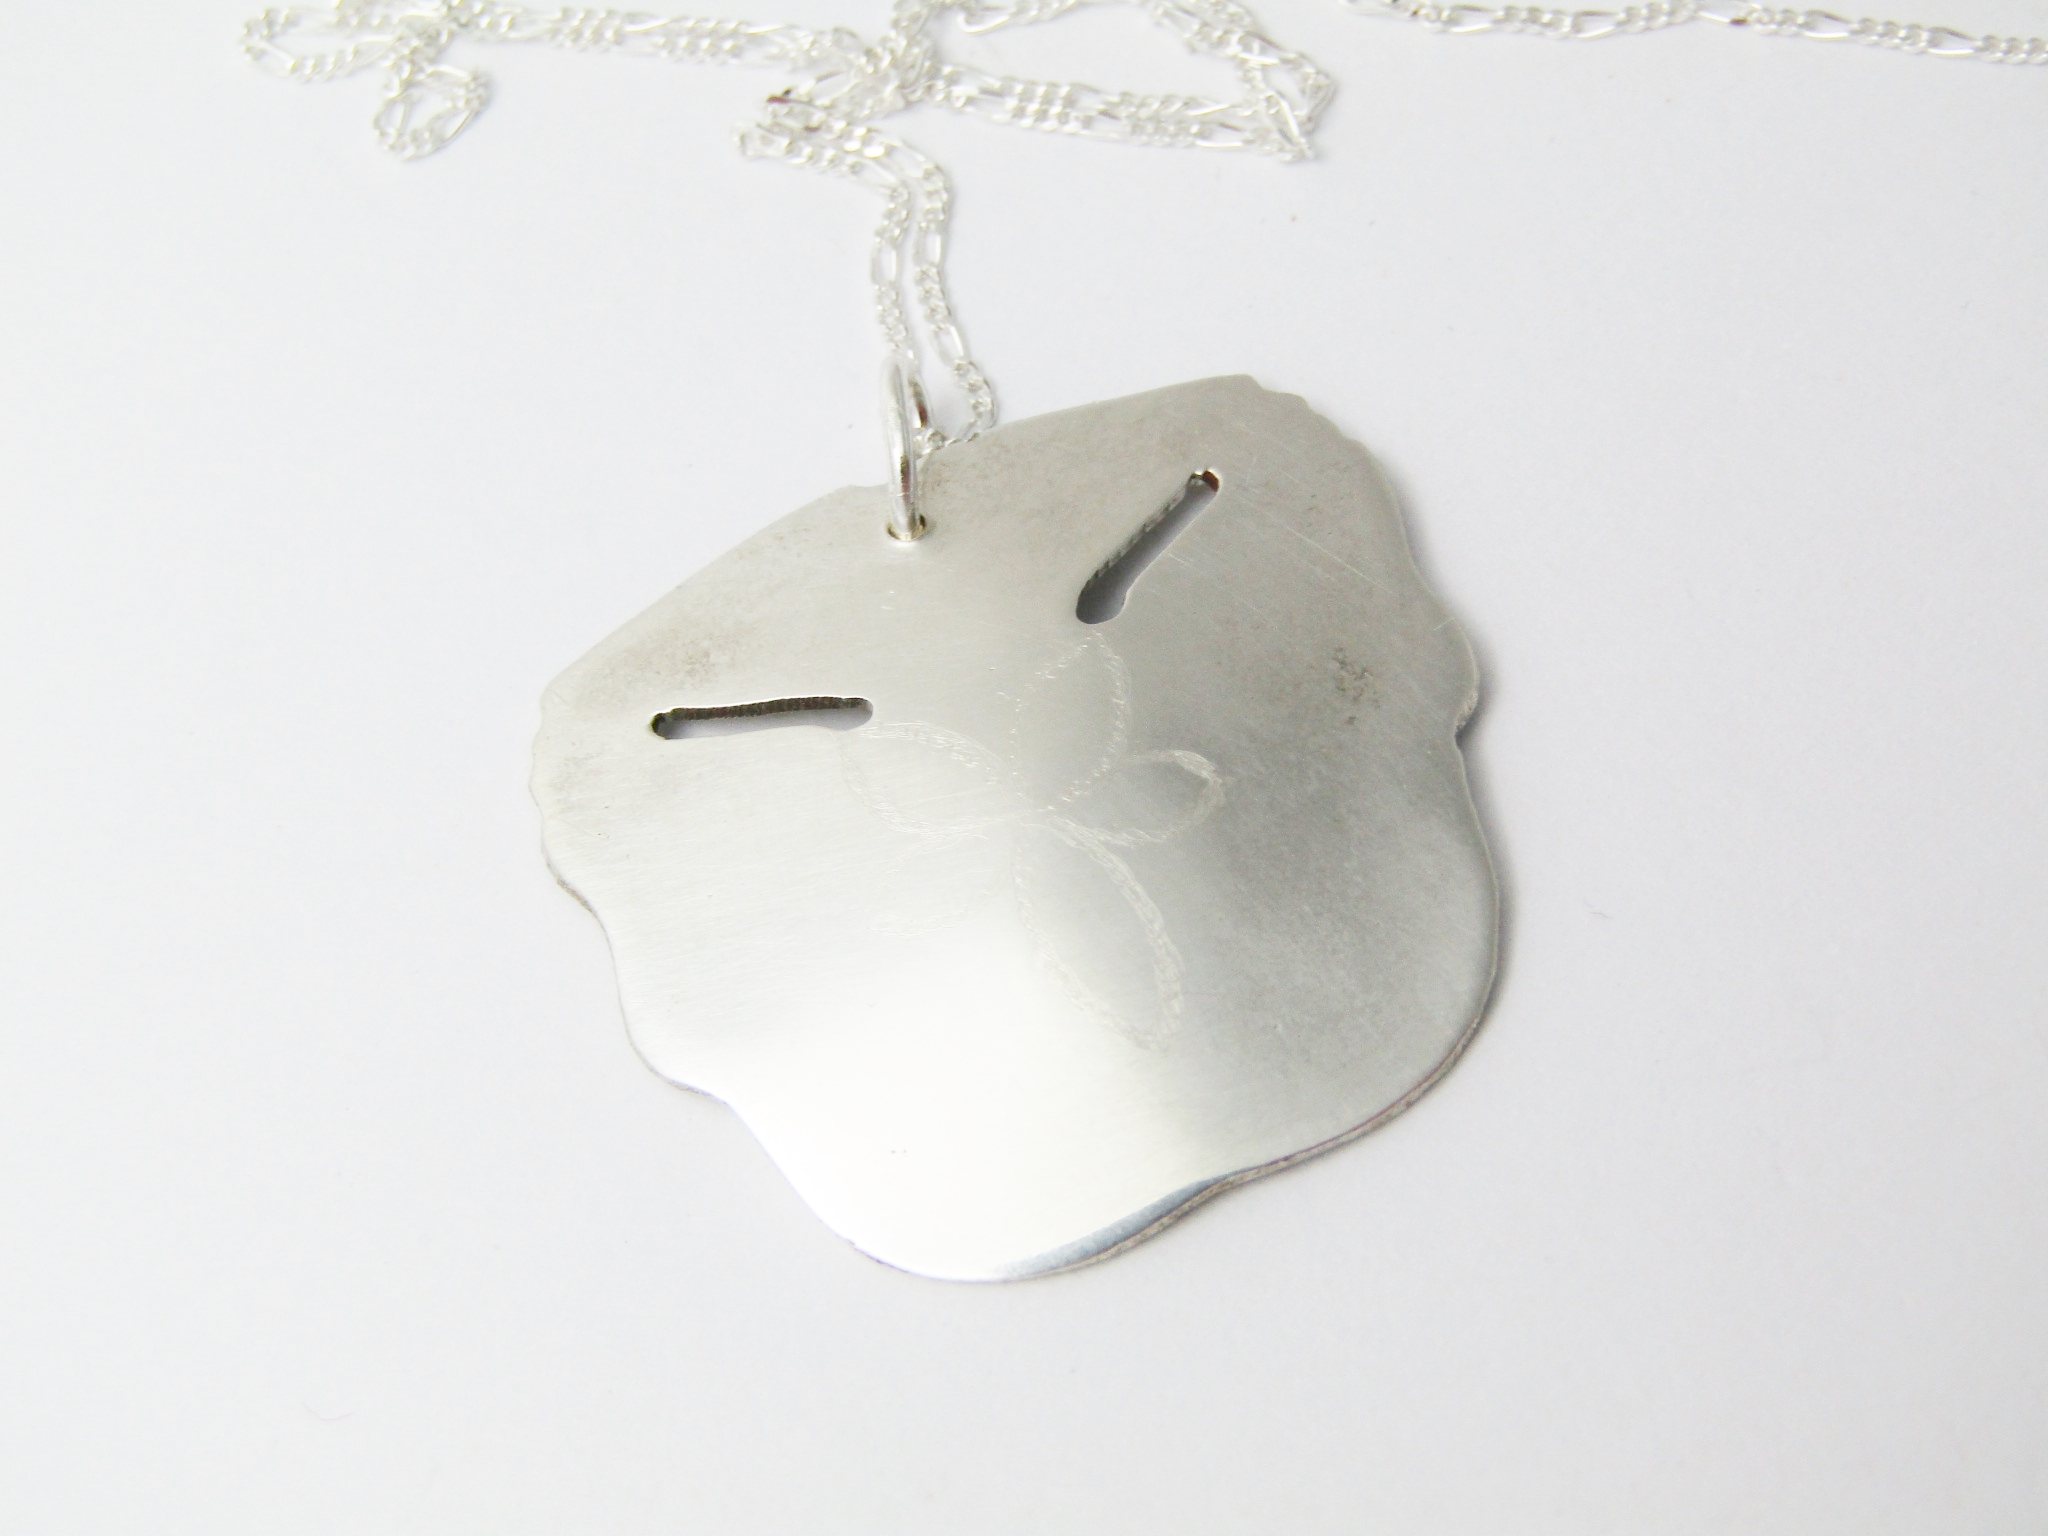 A Beautiful Pansy Design Pendant on Chain in Sterling Silver.